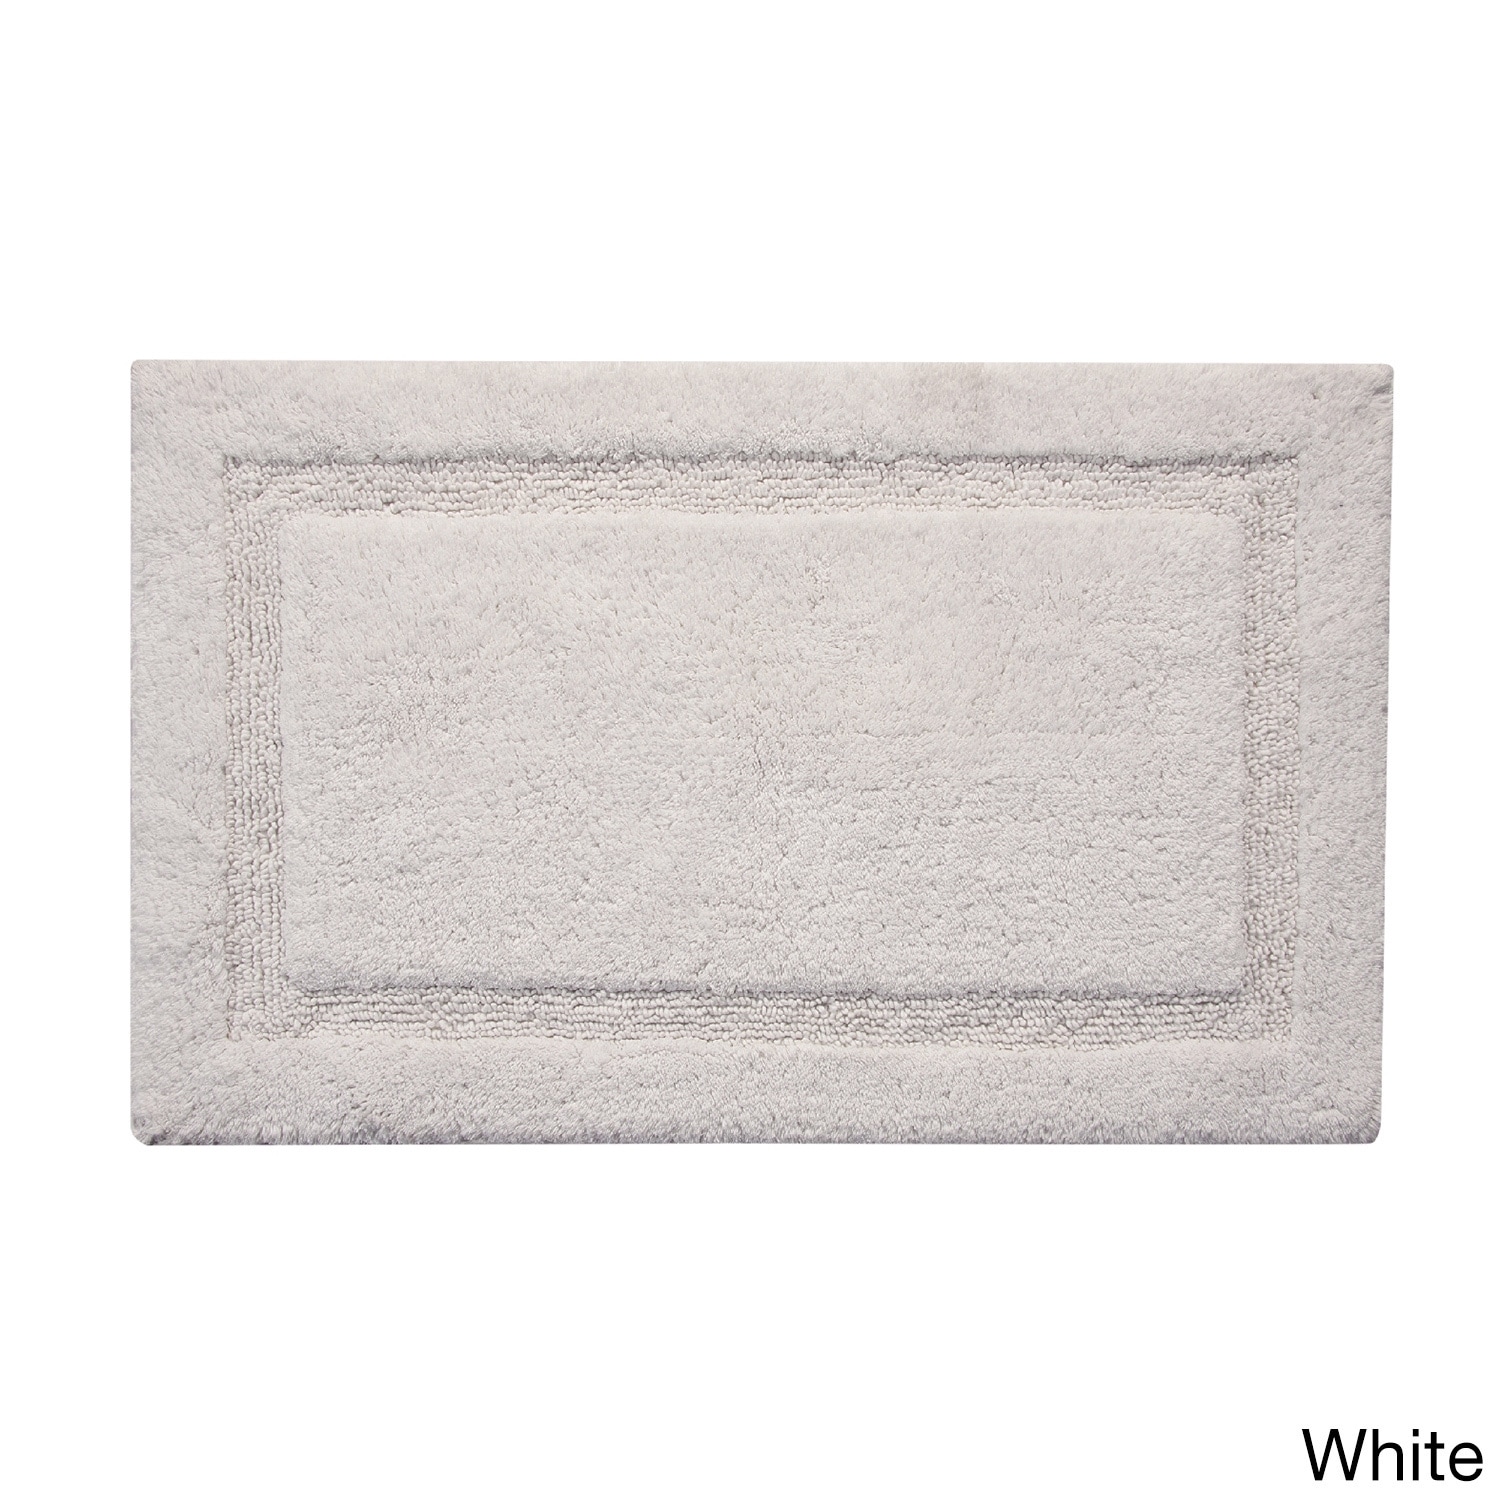 Walensee Large Bathroom Rug (24 x 60, Iiving Coral) Extra Soft and